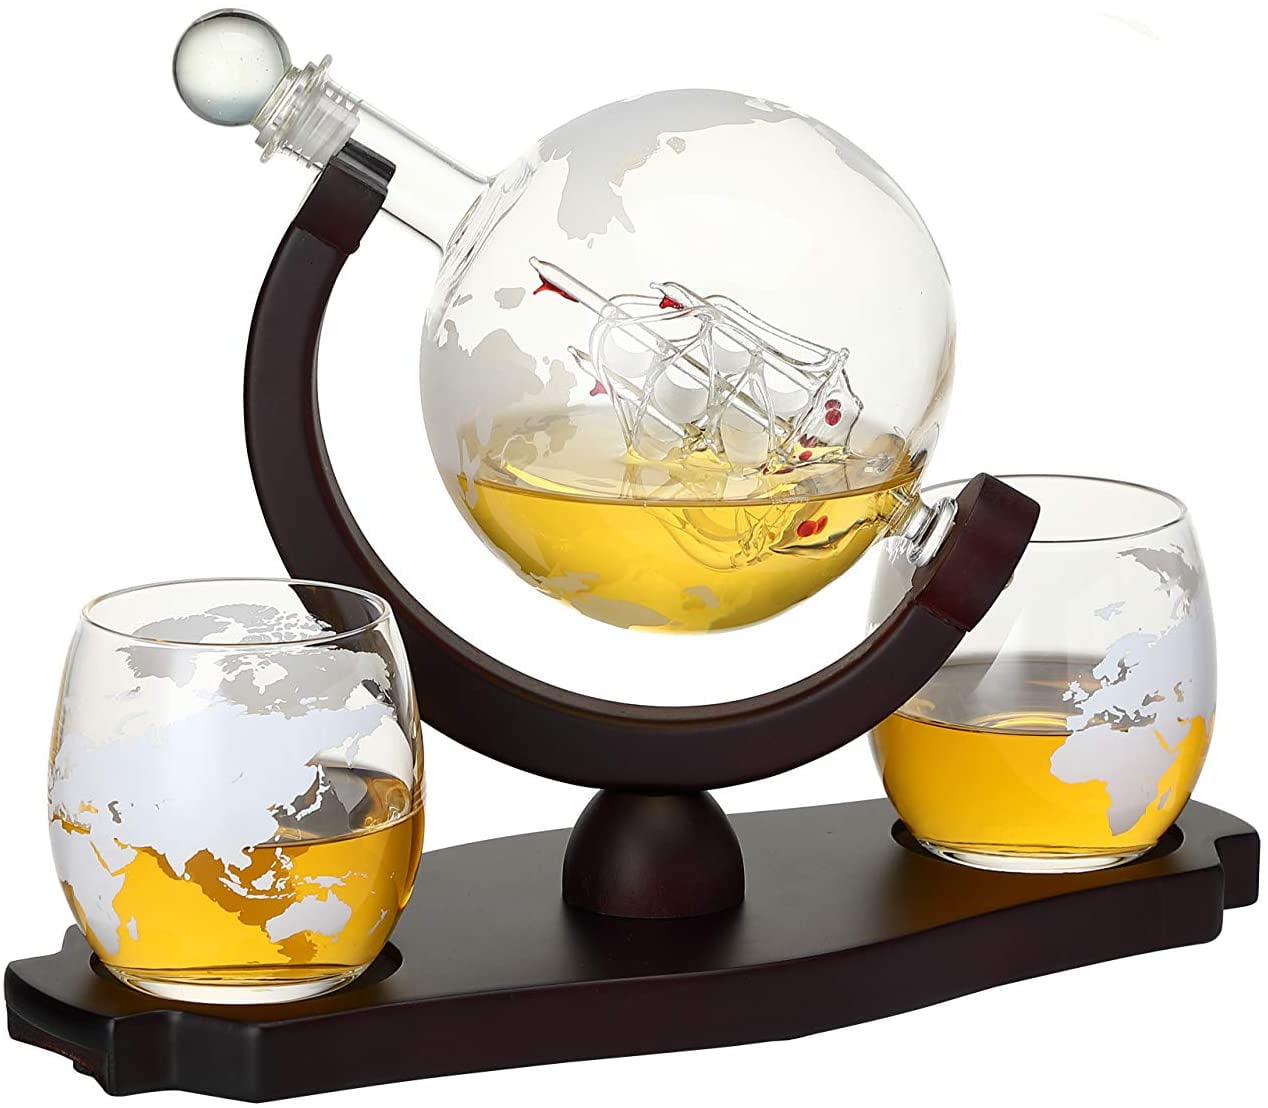 Scotch Whiskey Liquor Arolly Whiskey Decanter Globe Set with 2 Etched World Map Whiskey Glasses for Wine